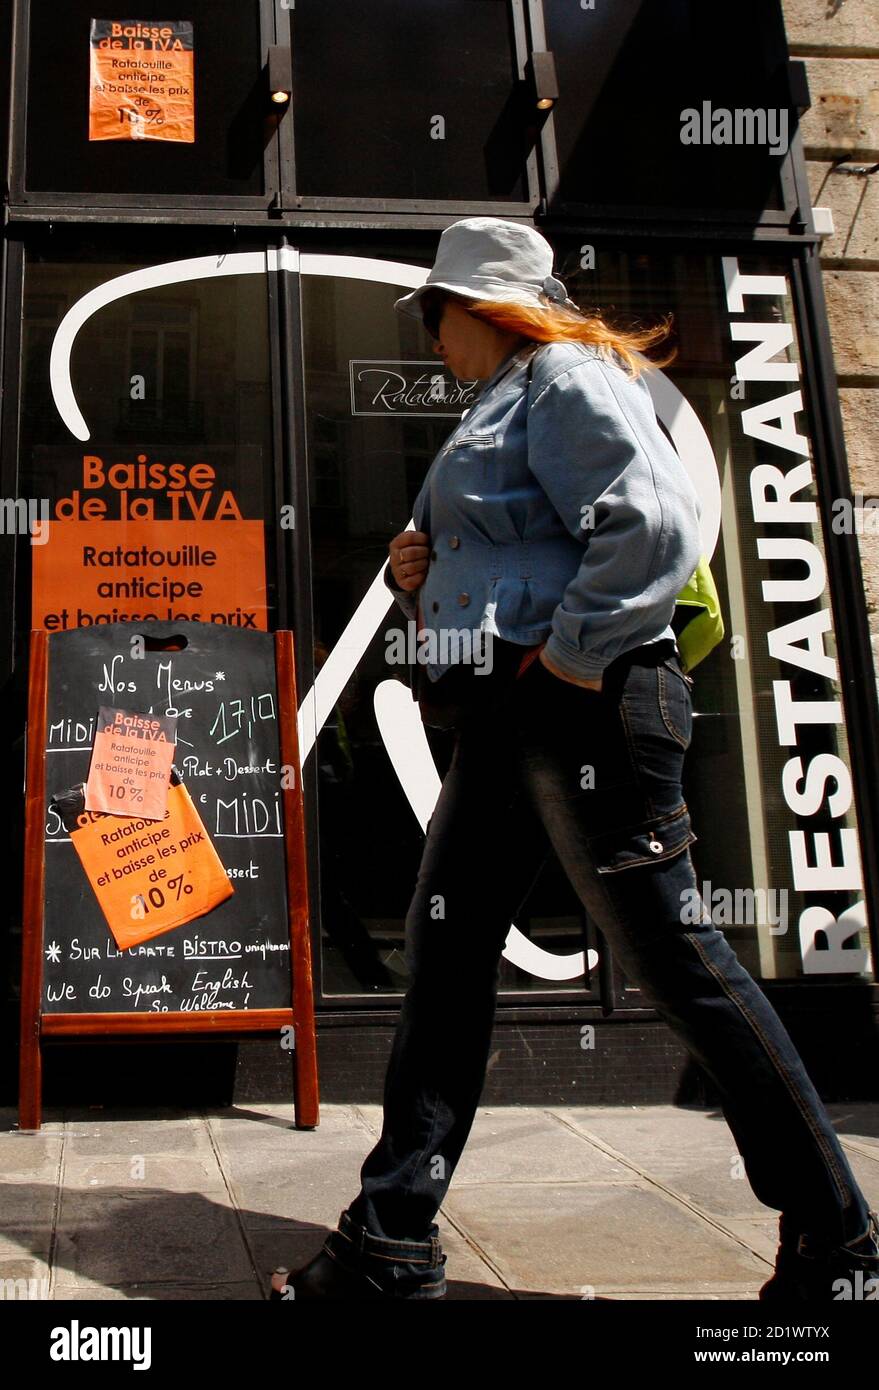 A woman walks past the restaurant 'Ratatouille' in Paris, June 23, 2009. The French parliament voted a bill that will reduce VAT in restaurants from 19.6% to 5.5% from July 1st, 2009.  The sign reads 'VAT reduction anticipated'.  Picture taken June 23, 2009. REUTERS/Benoit Tessier (FRANCE POLITICS BUSINESS FOOD) Stock Photo